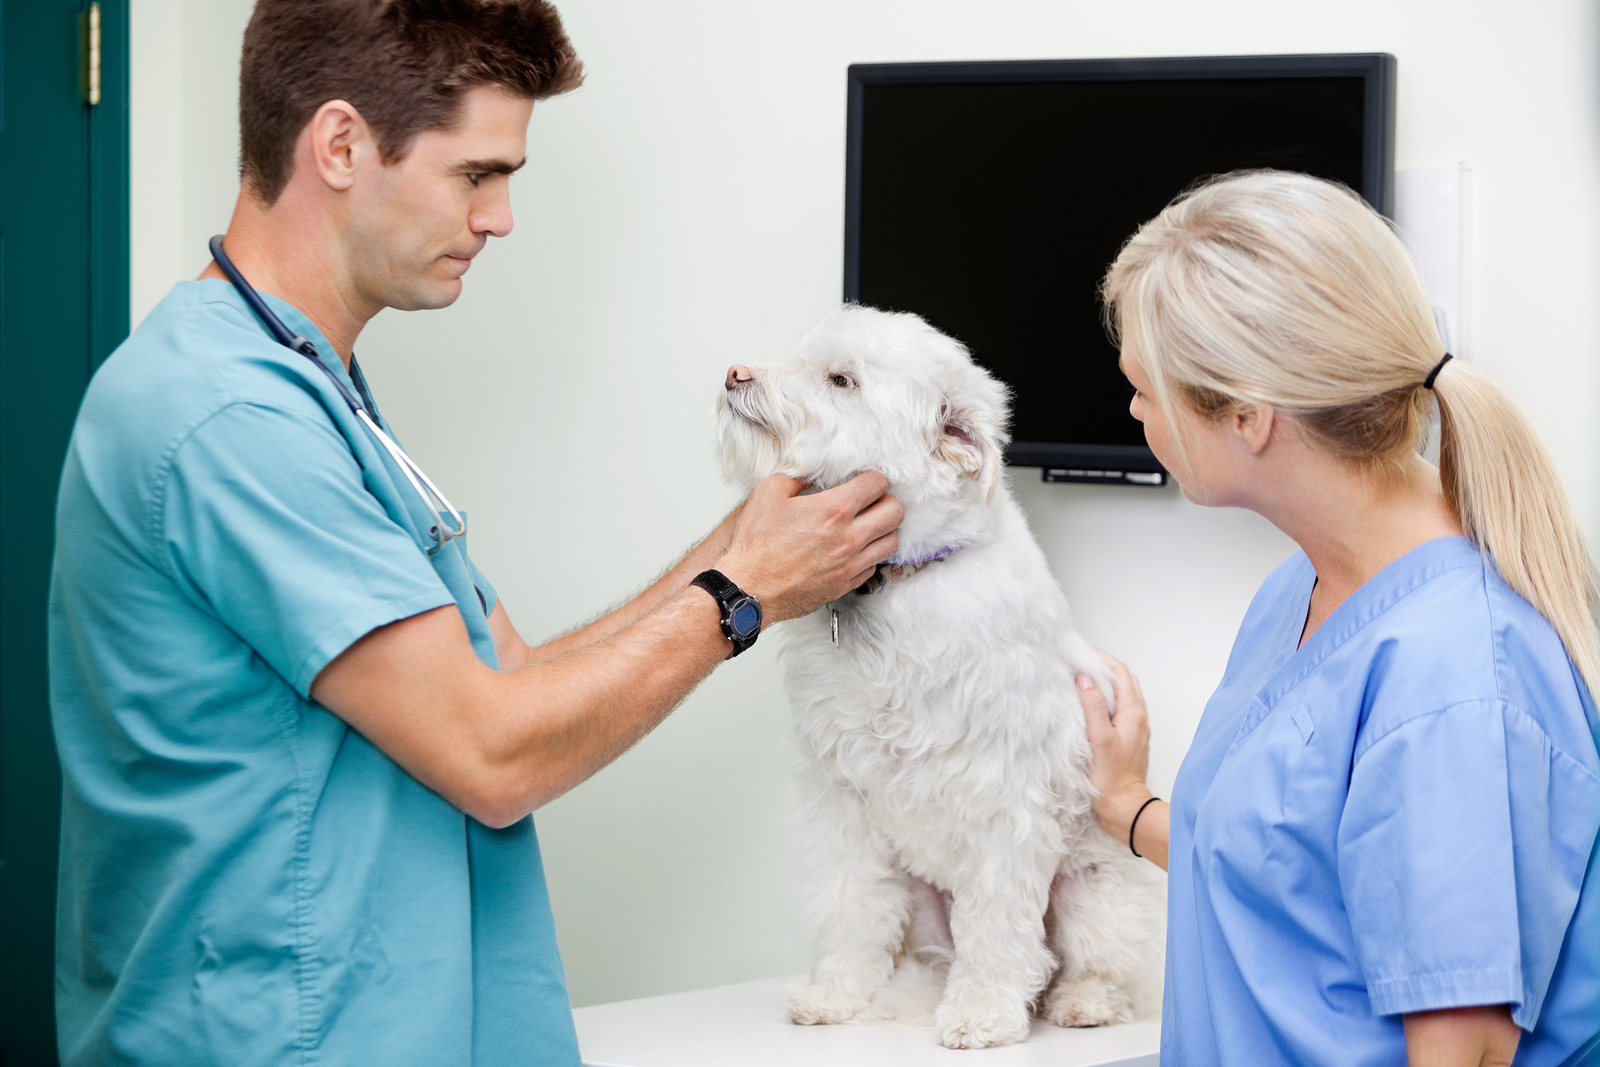 frequently asked questions about pet wellness exams from your veterinarian in germantown